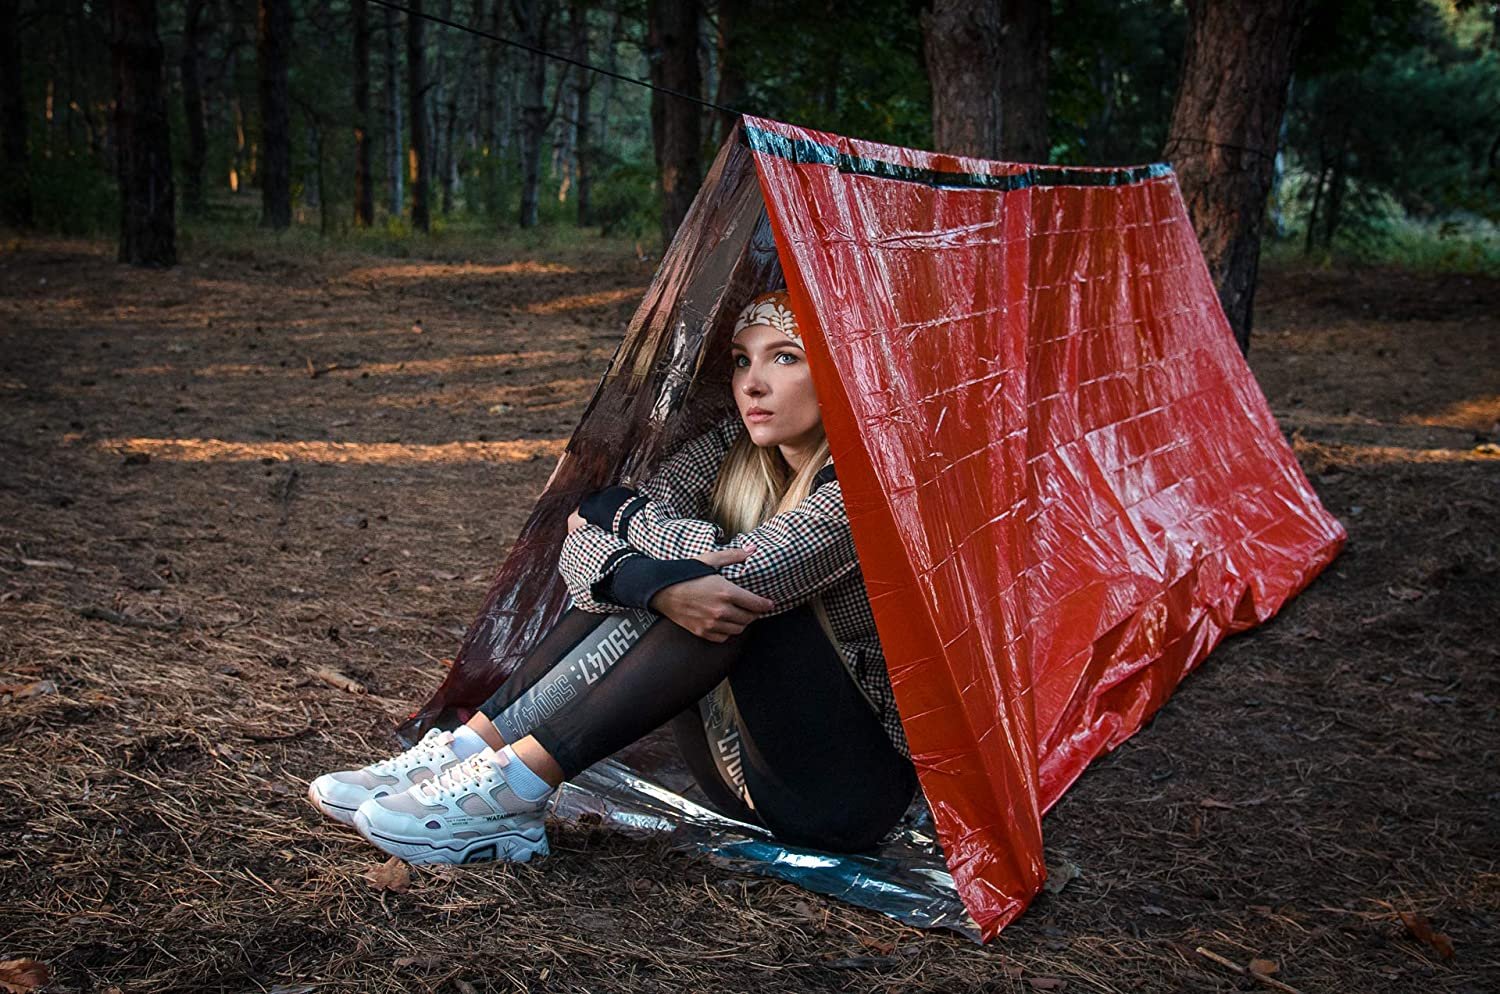 Emergency Shelter  Emergency Tube Tent  Reflective Mylar Survival Tent  Includes Whistle, Compass and Survival Hook - Pack of 2 - image 5 of 7